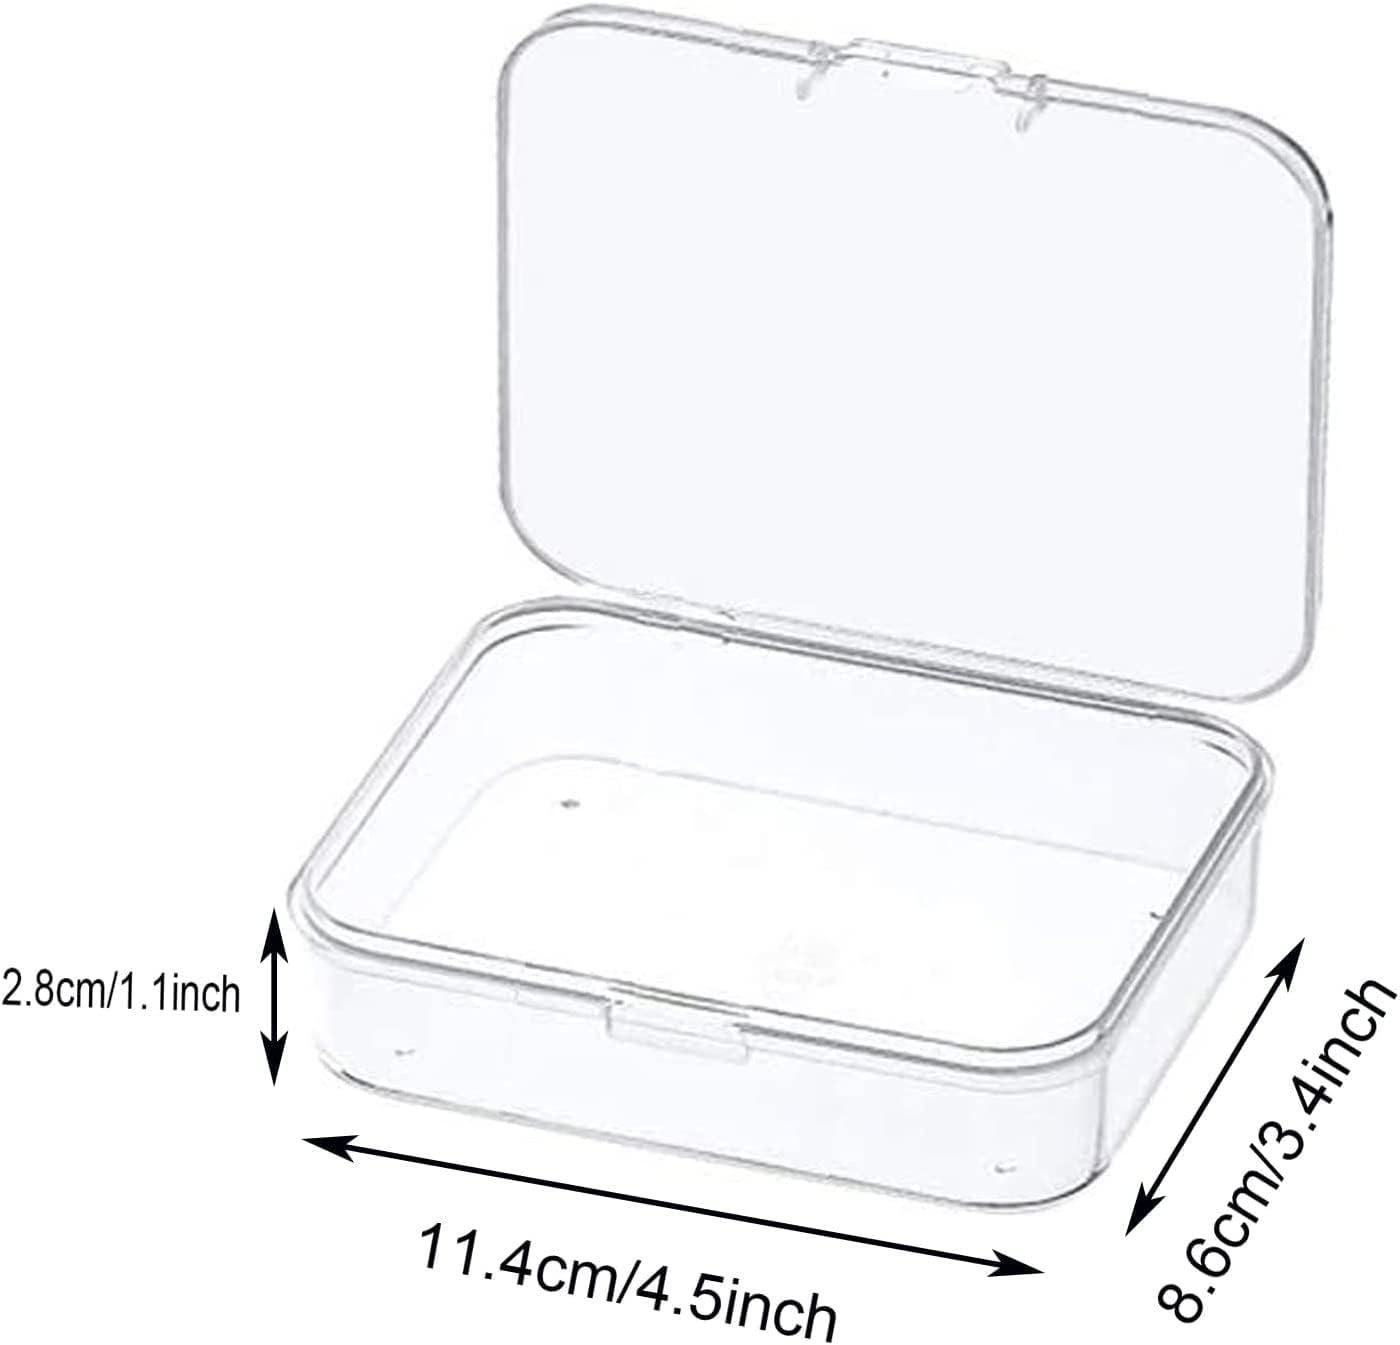 MFDSJ 6 Pcs Mini Plastic Storage Containers Box with Lid 4.5x3.4 Inches  Clear Rectangle Box for Collecting Small Items Beads Game Pieces Business  Cards Crafts Accessories